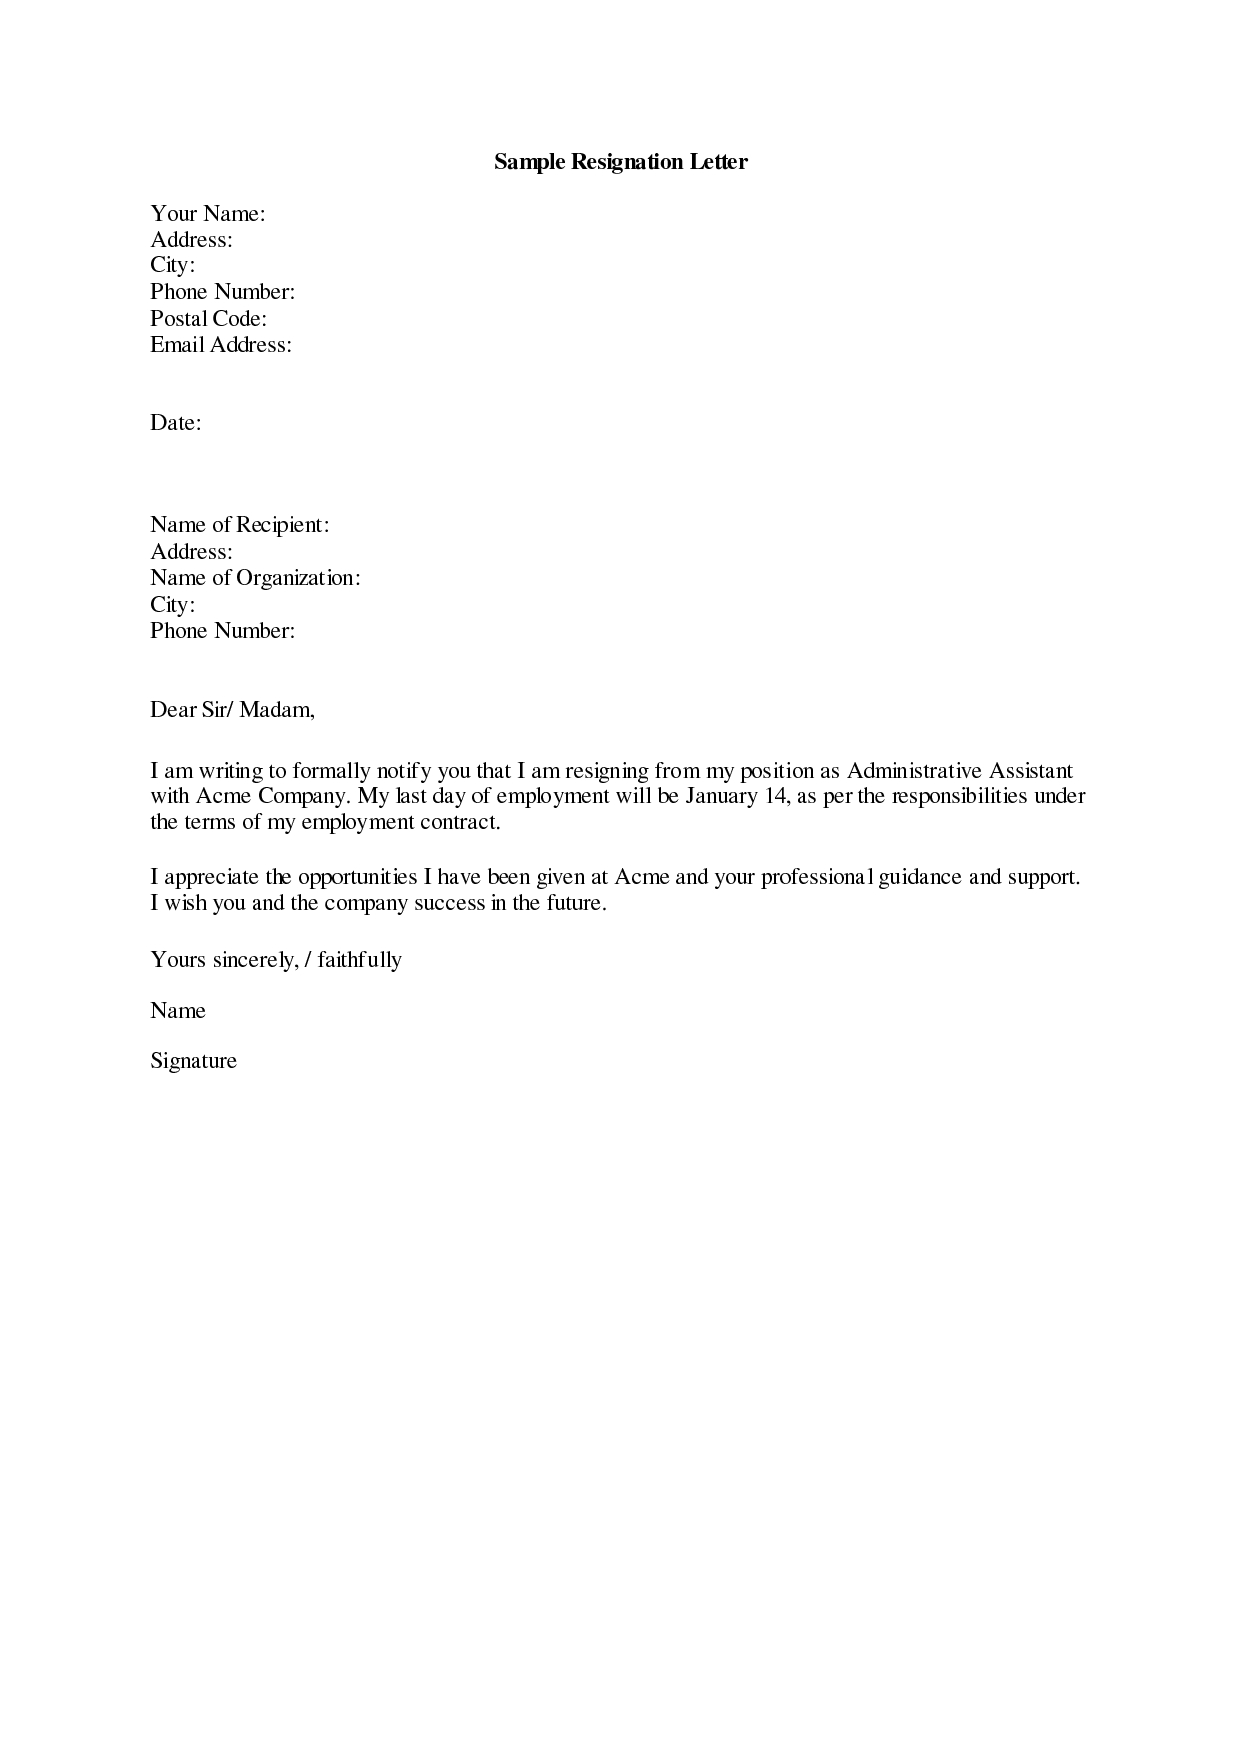 Resignation Letter Template Free Download - Resignation Letter Sample 19 Letter Of Resignation